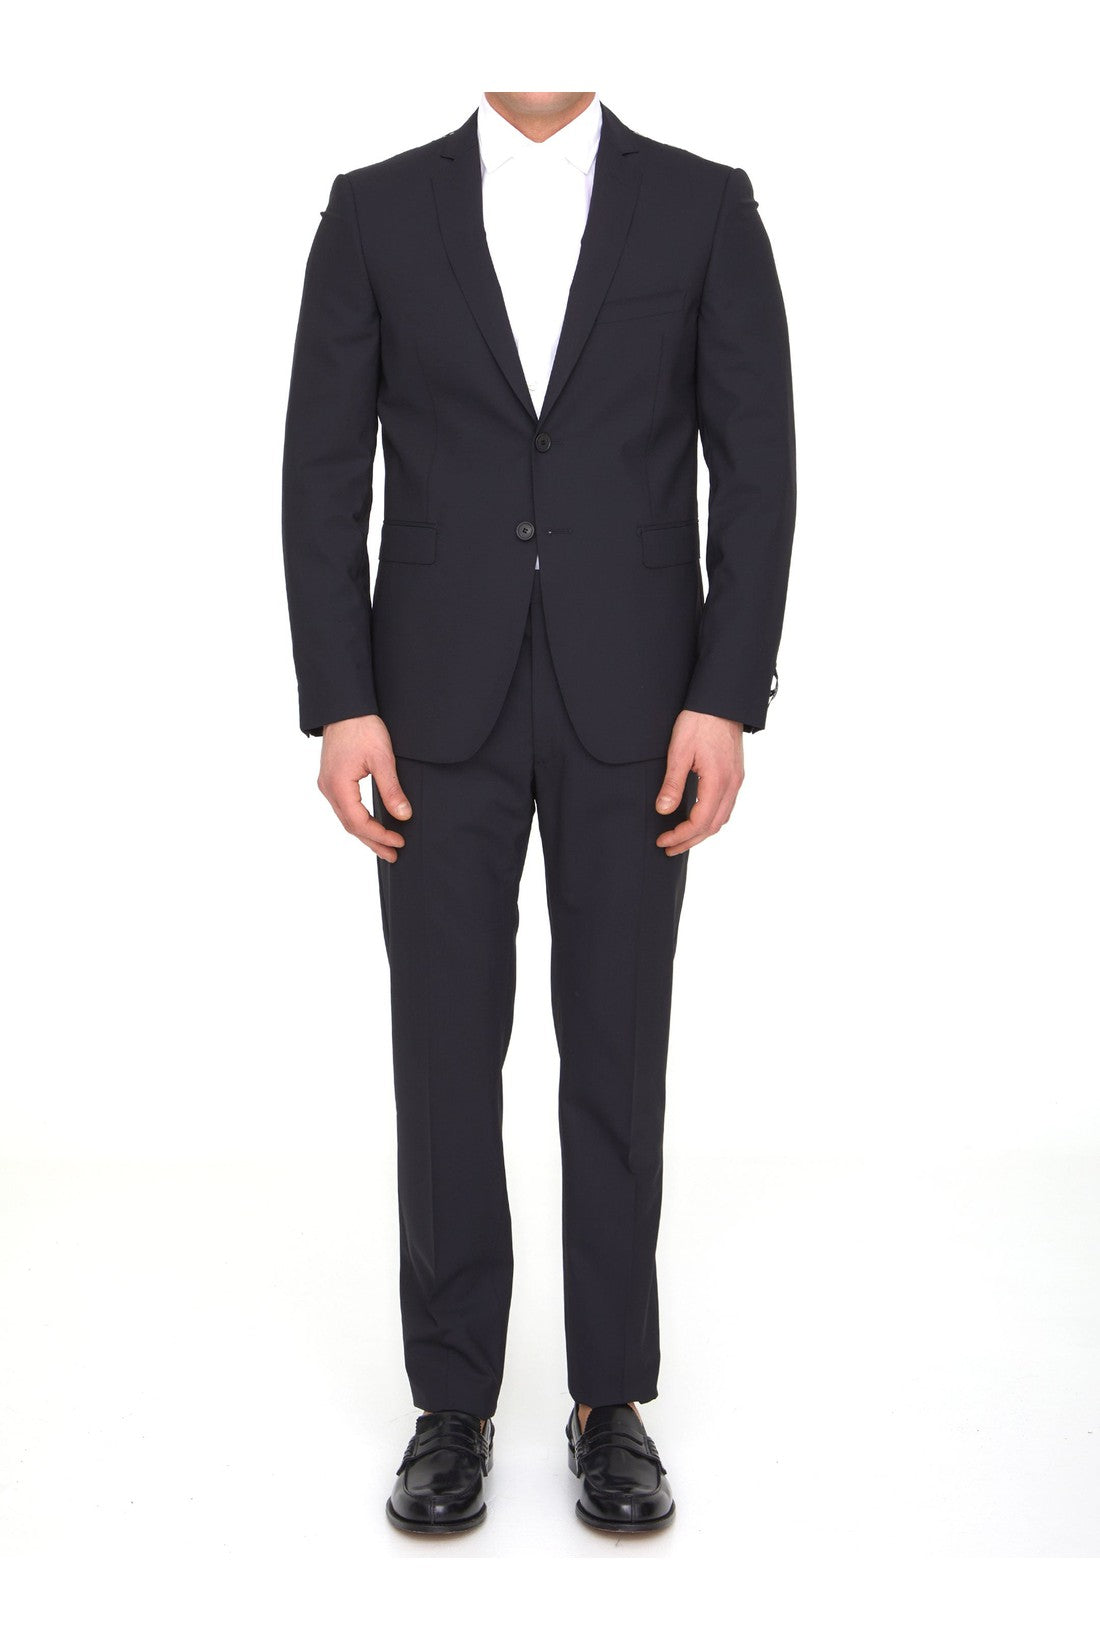 Black wool two-piece suit